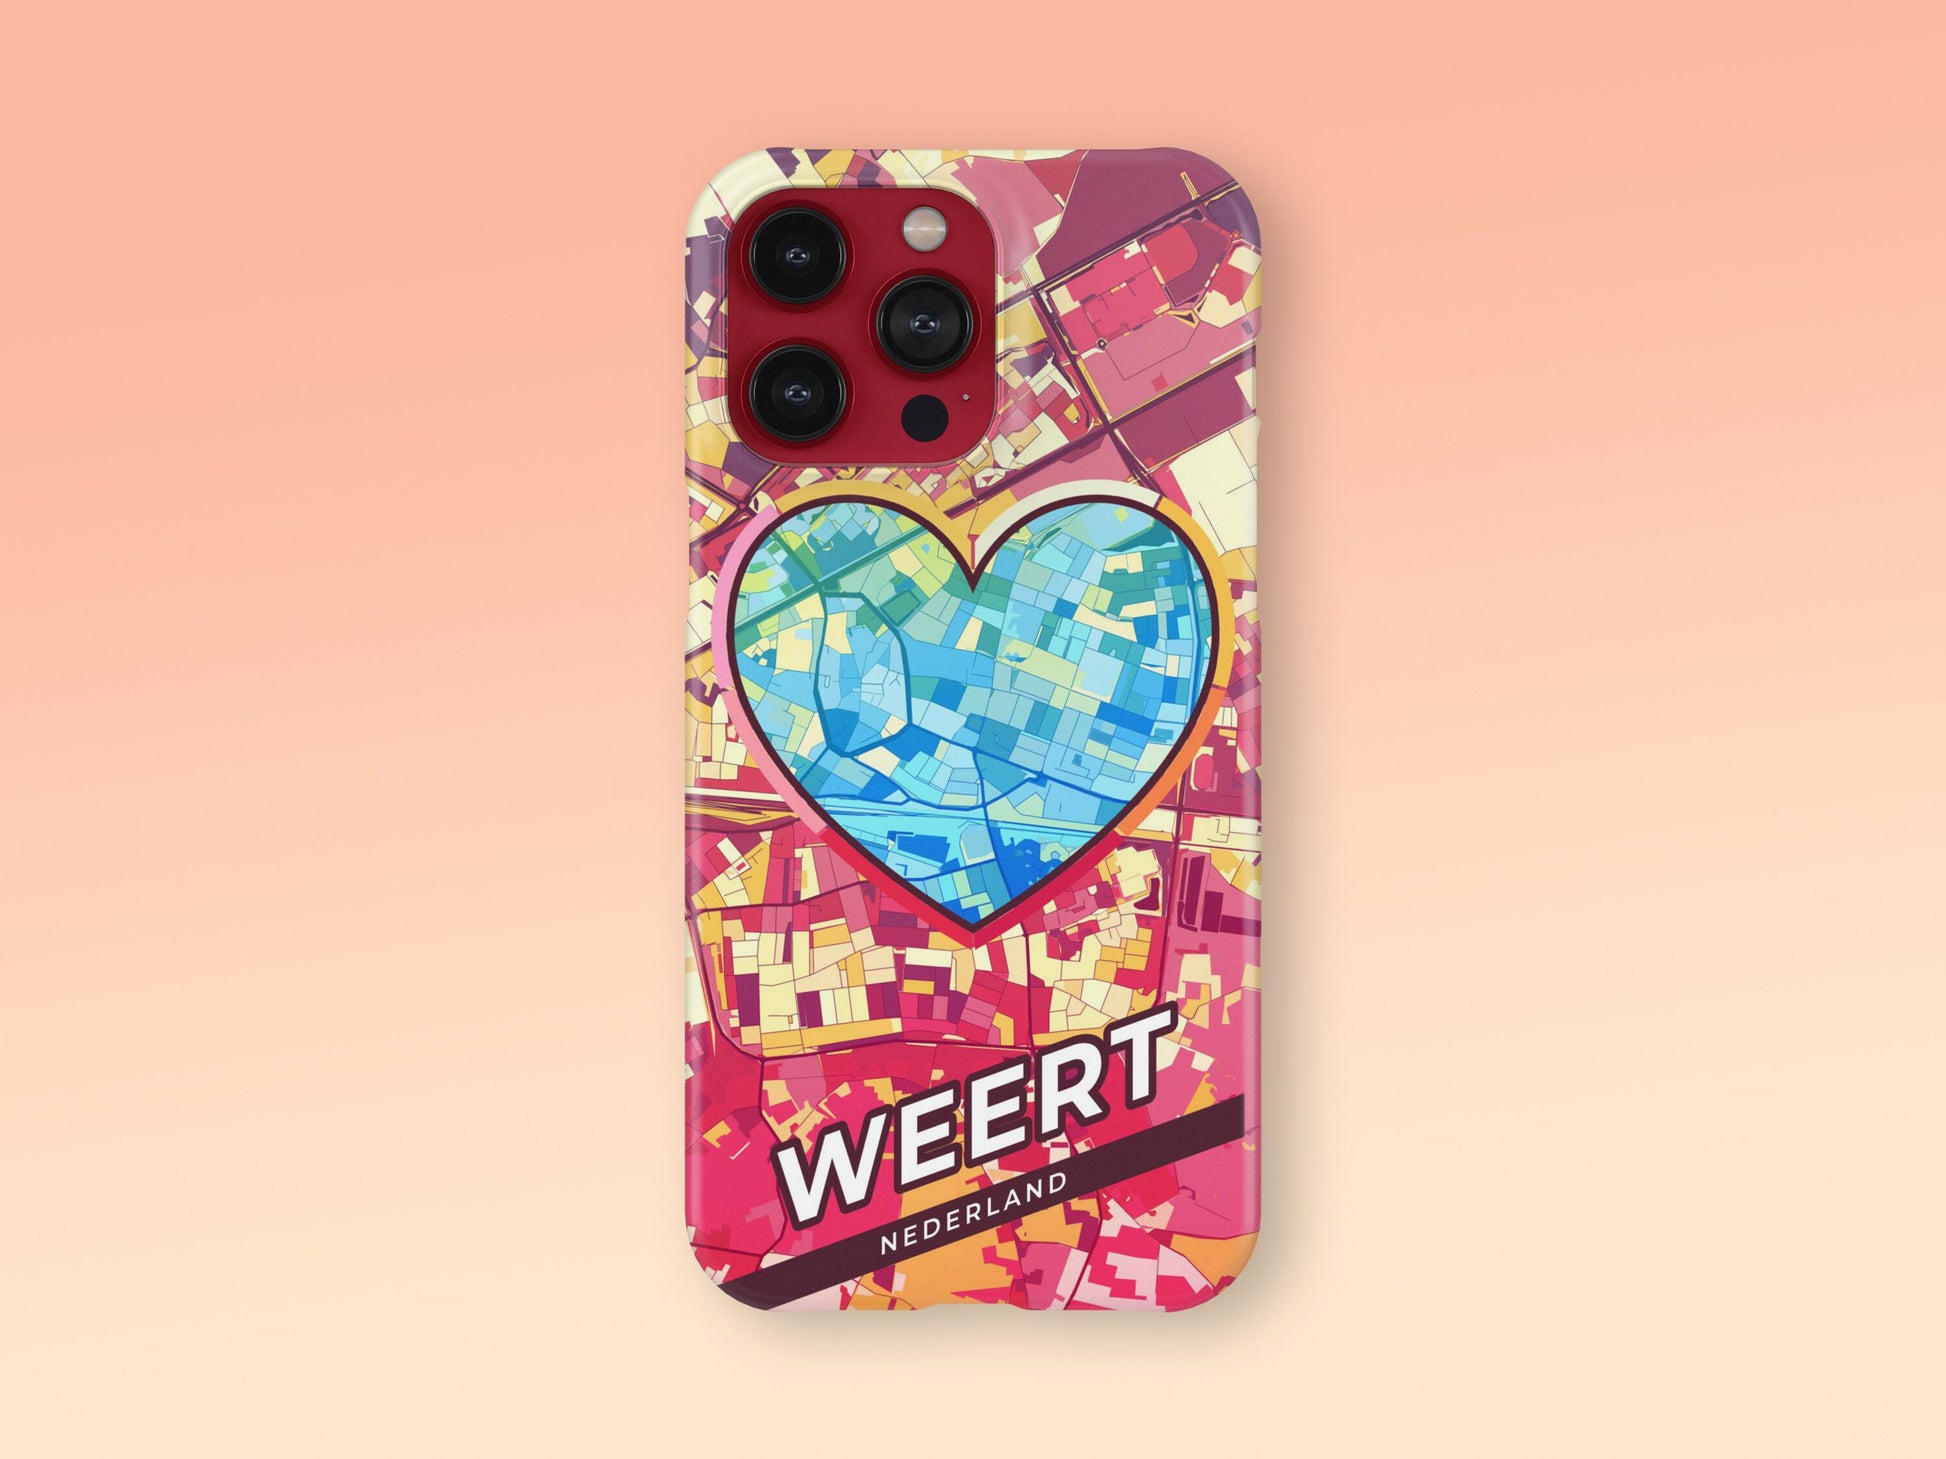 Weert Netherlands slim phone case with colorful icon 2